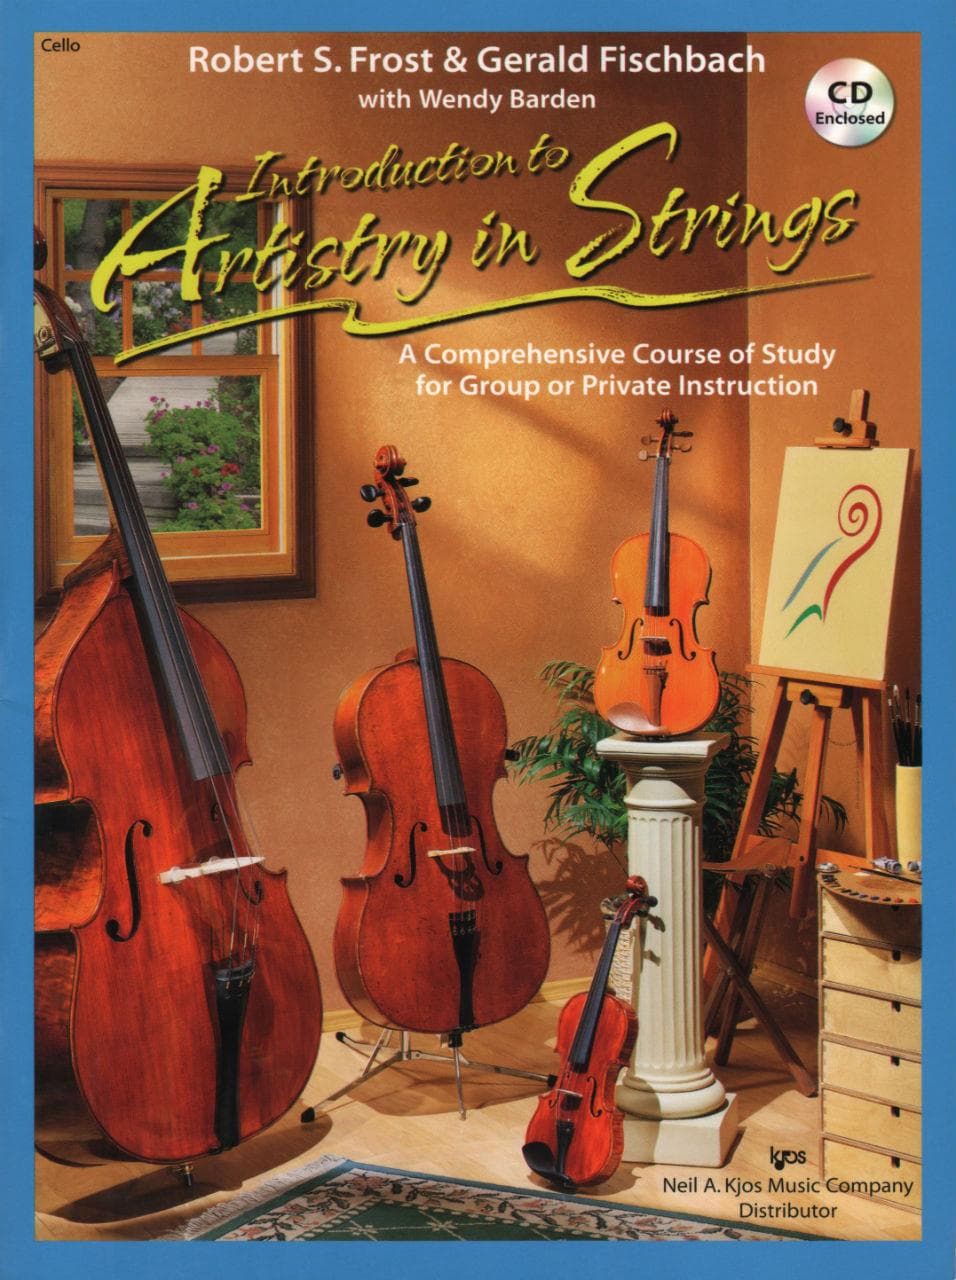 Fischbach/Frost/Barden - Introduction to Artistry in Strings - Cello - Kjos Music Co